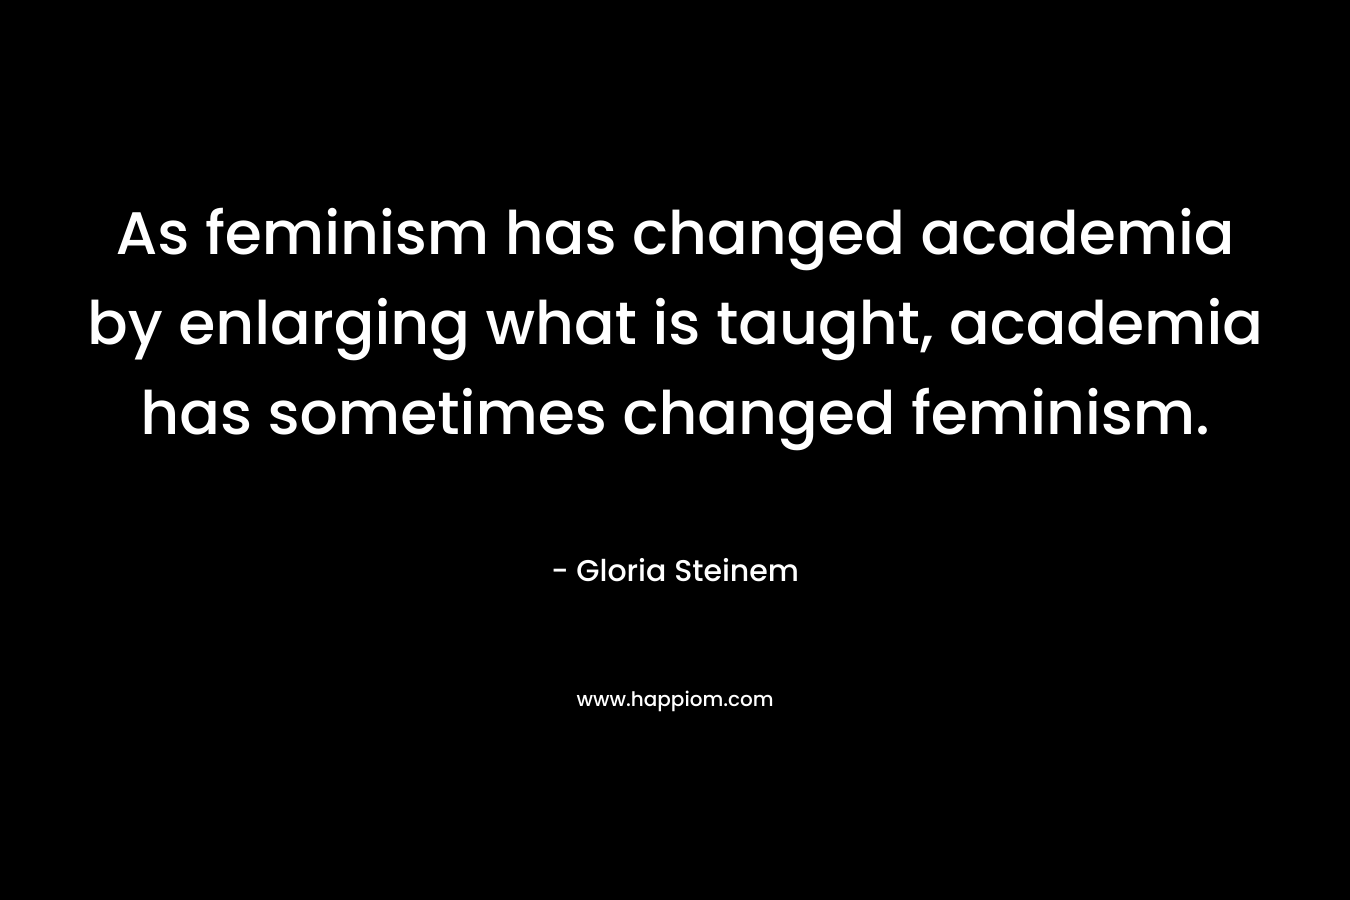 As feminism has changed academia by enlarging what is taught, academia has sometimes changed feminism. – Gloria Steinem